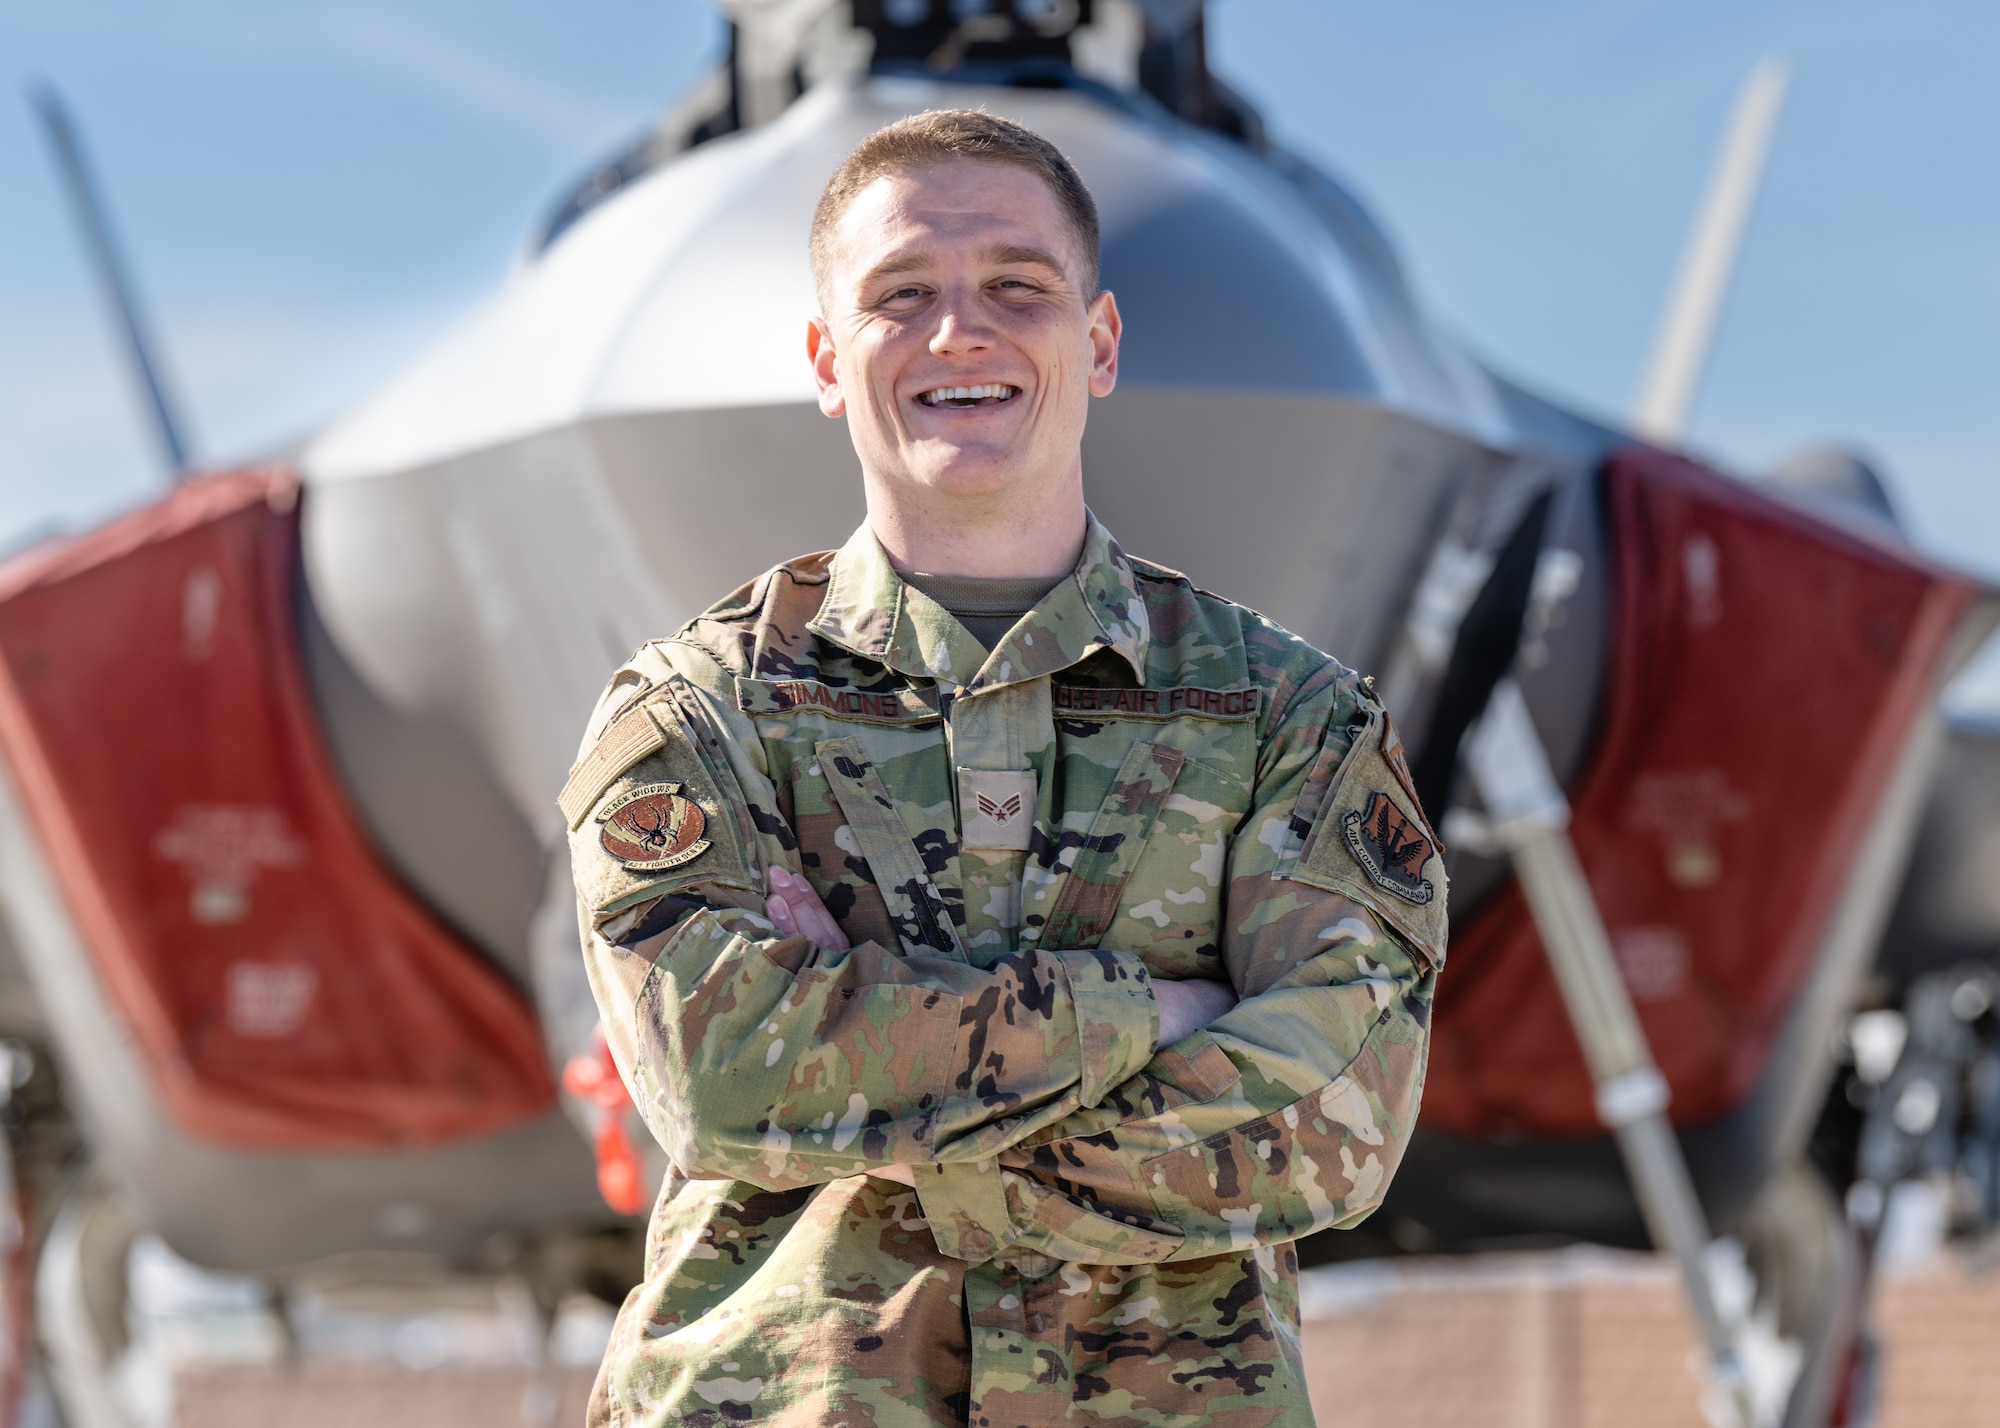 A photo of Senior Airman Erik Simmons standing in front of an F-35A fighter jet.